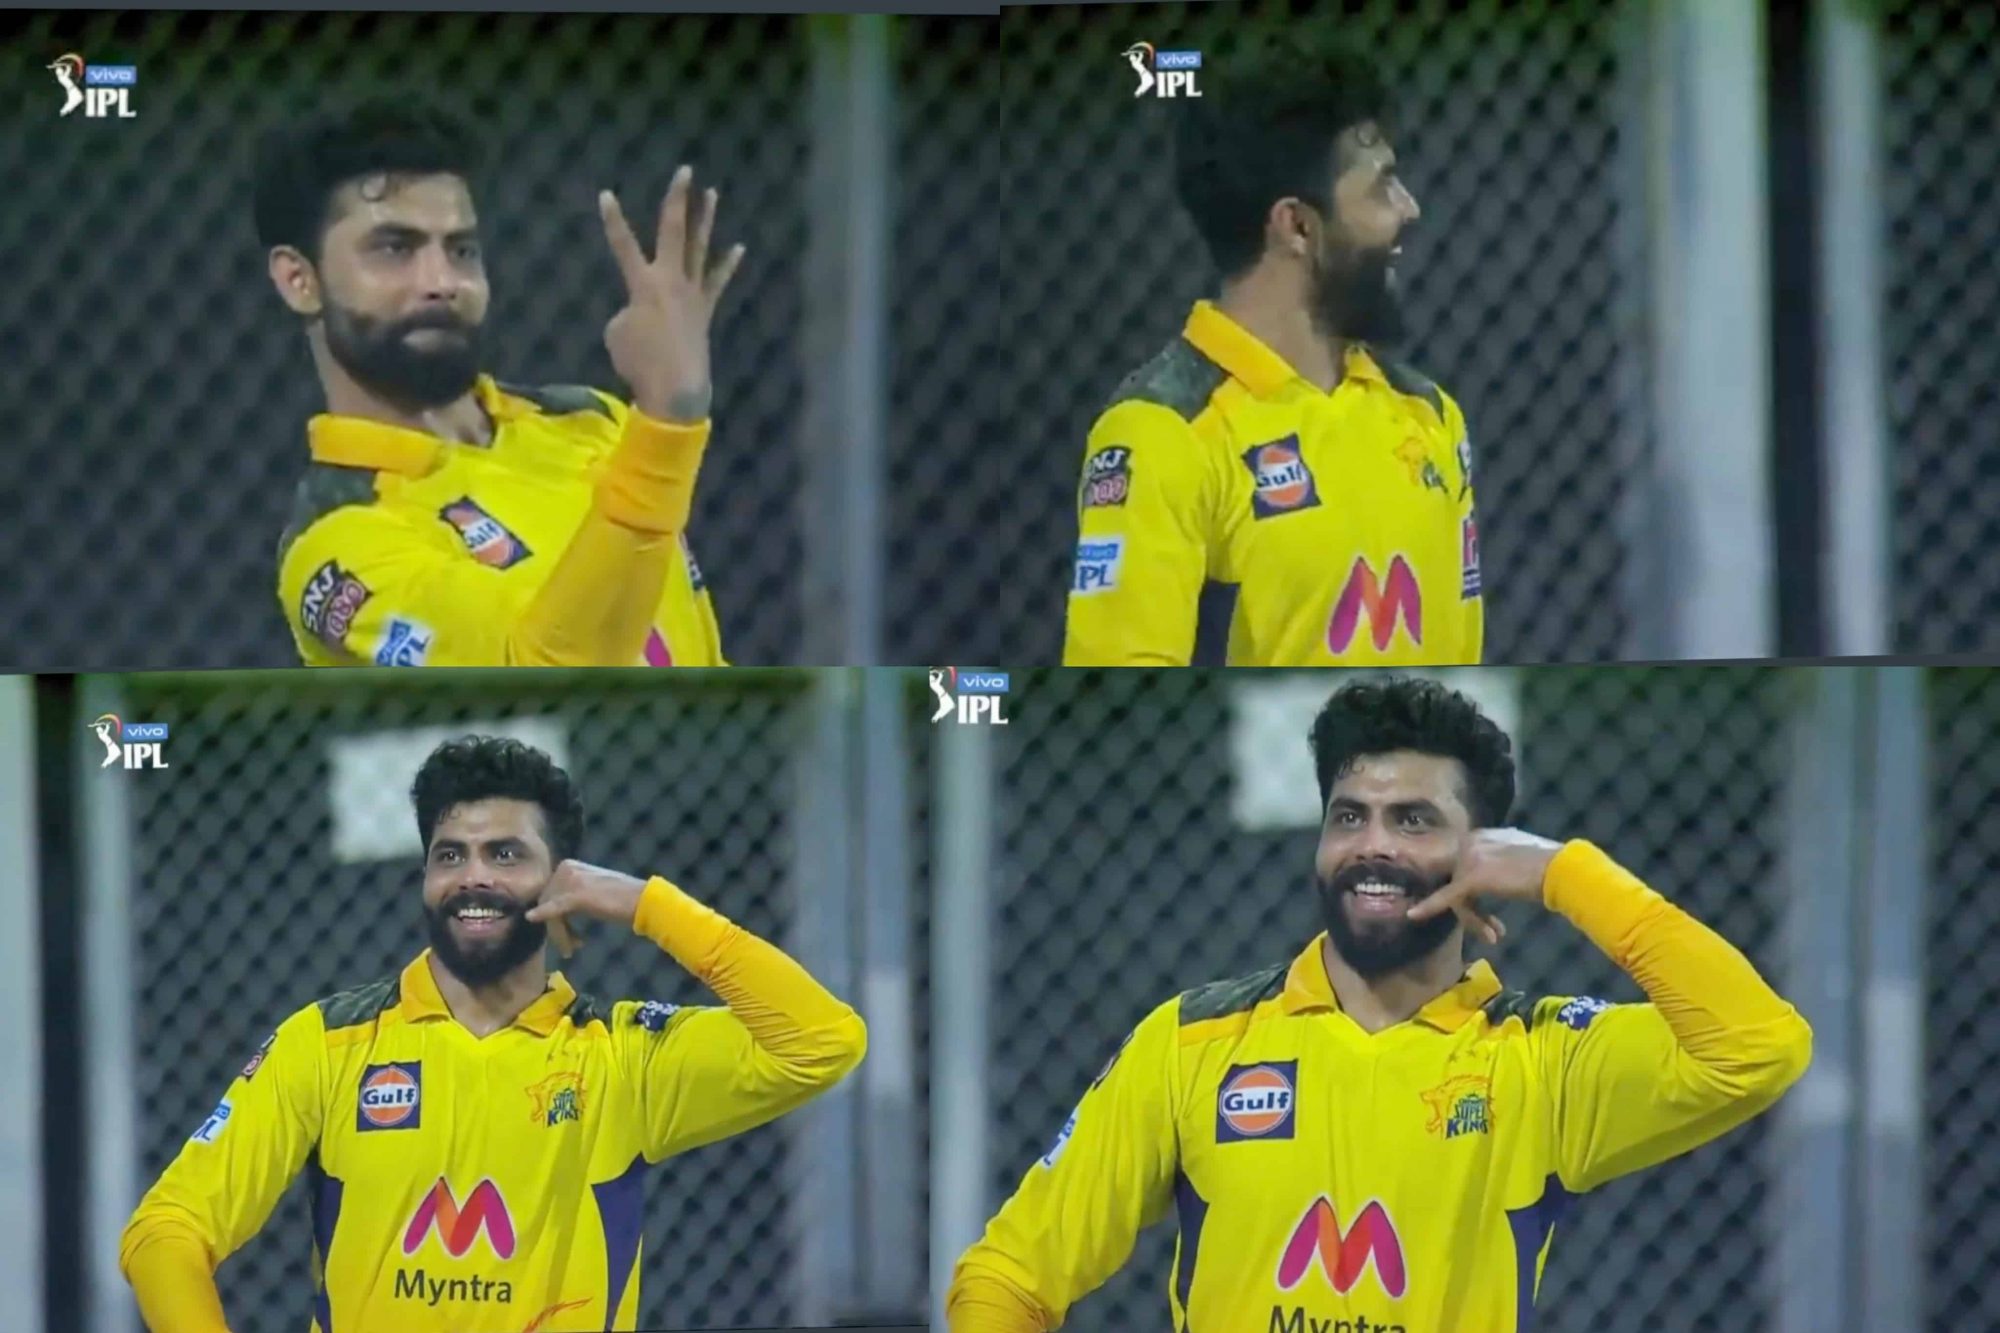 Watch: Ravindra Jadeja’s Special Celebration After Taking 4 Catches Goes Viral